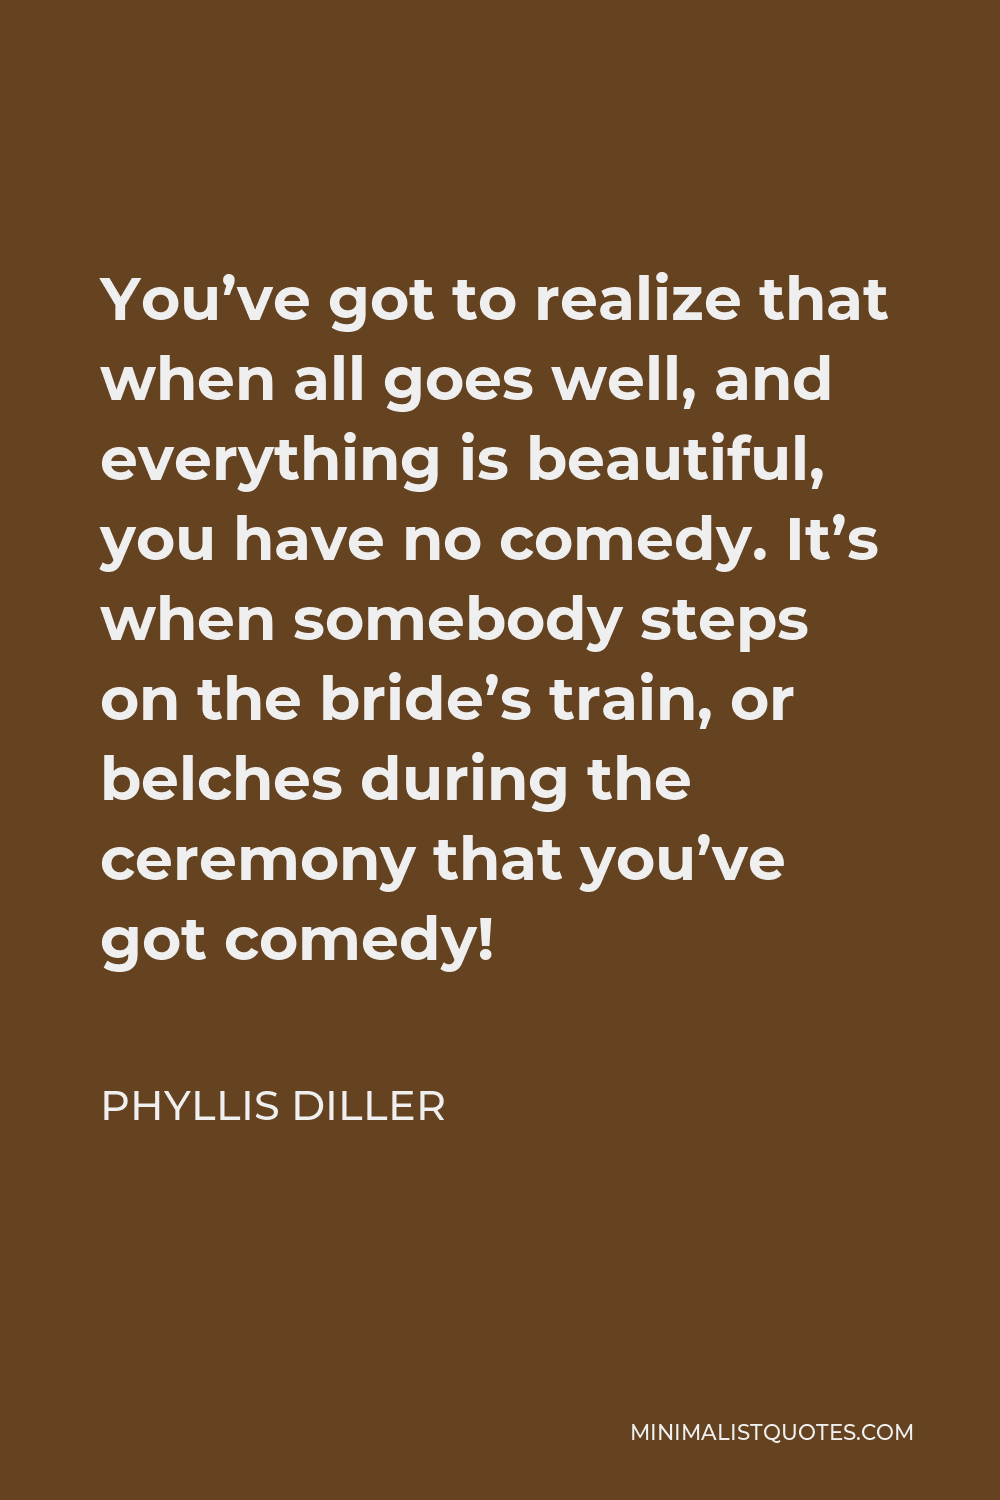 Phyllis Diller Quote - You’ve got to realize that when all goes well, and everything is beautiful, you have no comedy. It’s when somebody steps on the bride’s train, or belches during the ceremony that you’ve got comedy!